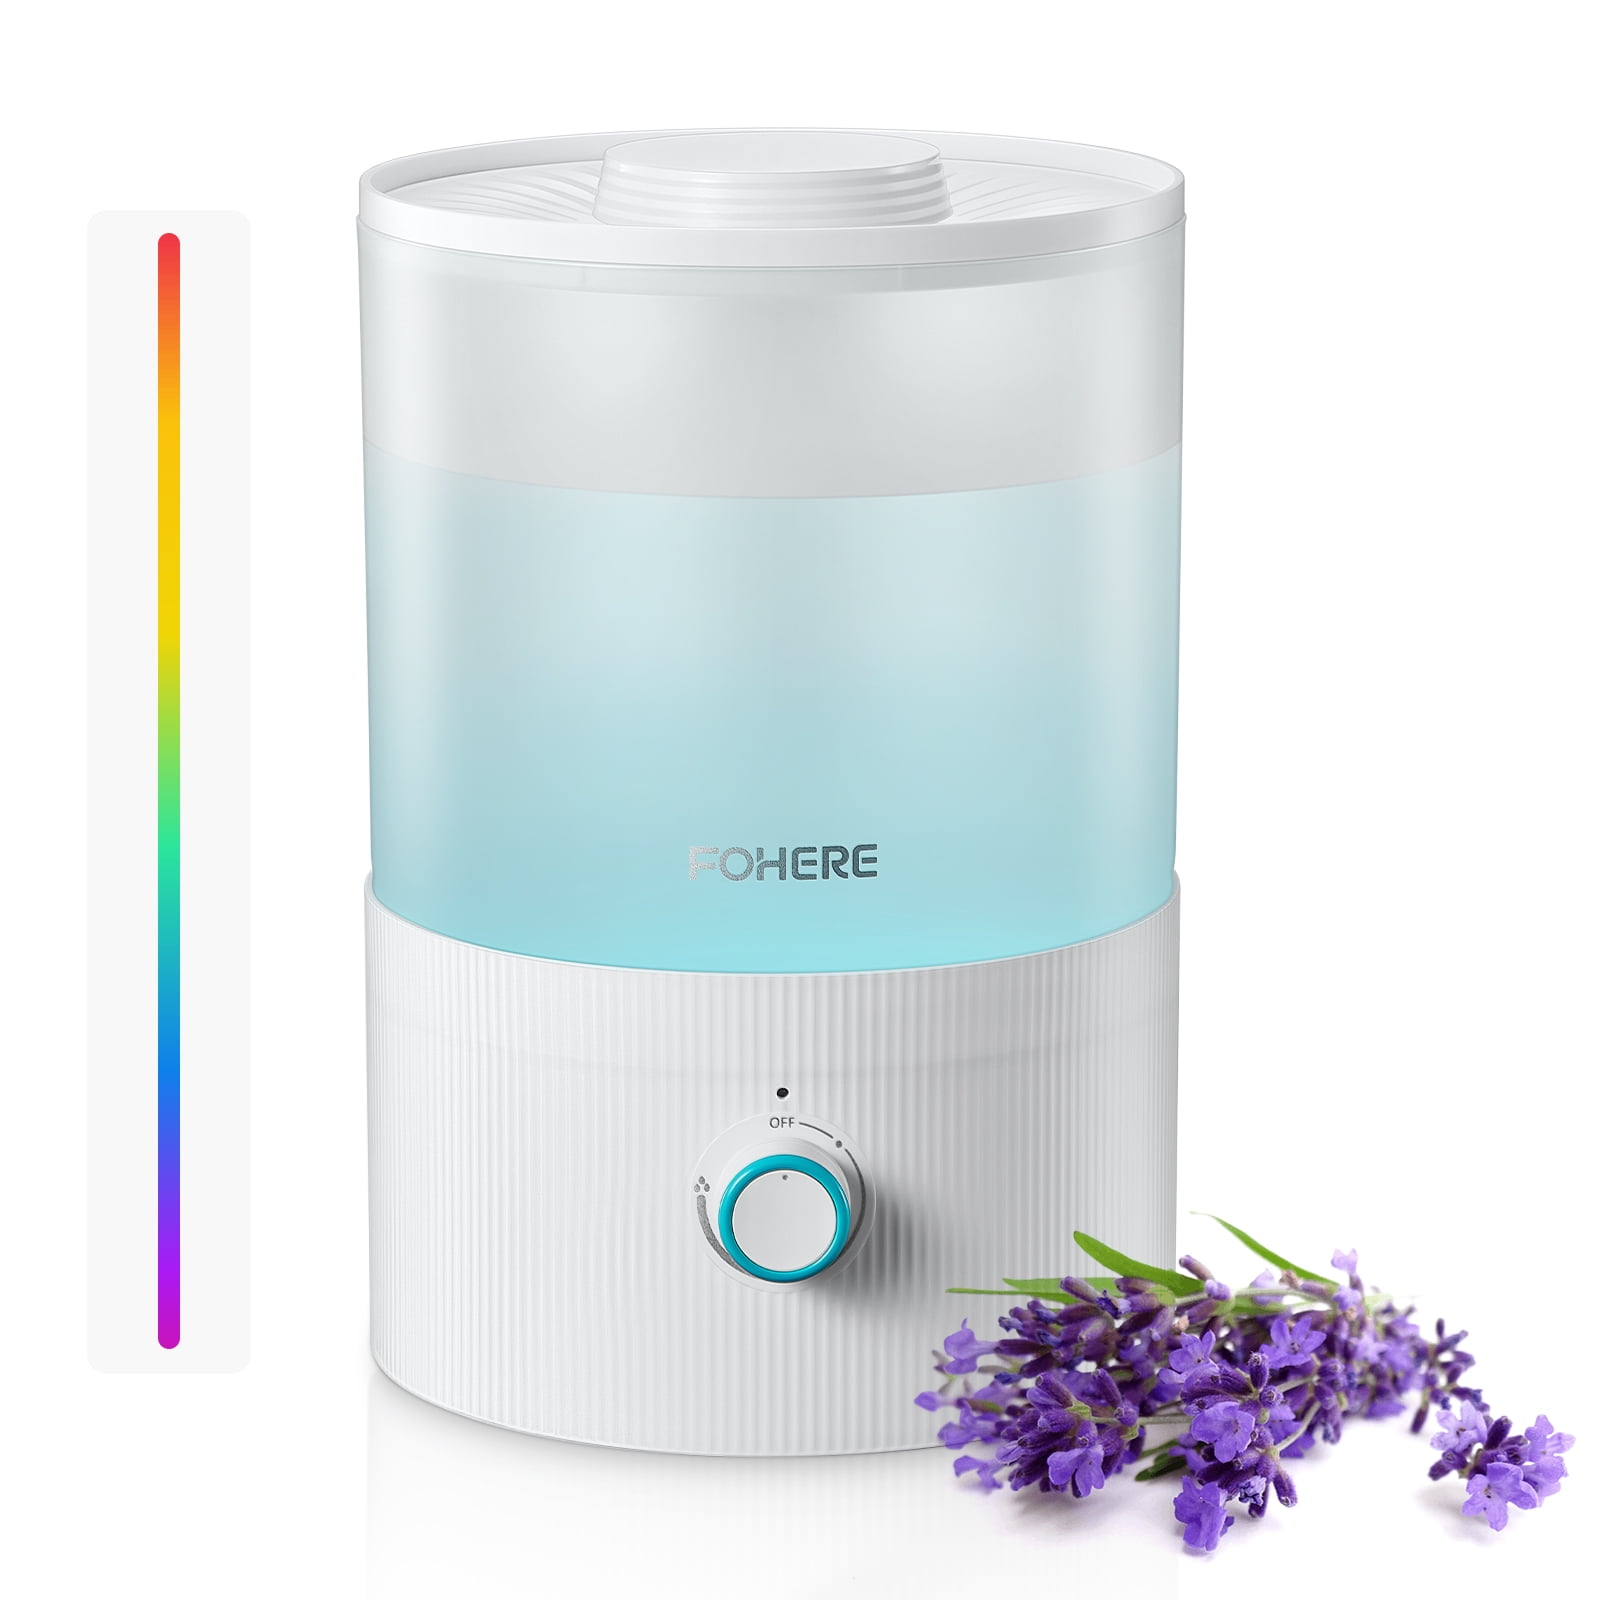 FOHERE Humidifiers for Bedroom, 3.2L Top Fill Cool Mist Ultrasonic  Humidifier for Baby Rooms and Plants, 2-IN-1 Essential Oil Diffuser with  7-color Light and Auto Shut-off, BPA-Free, Quiet, White 